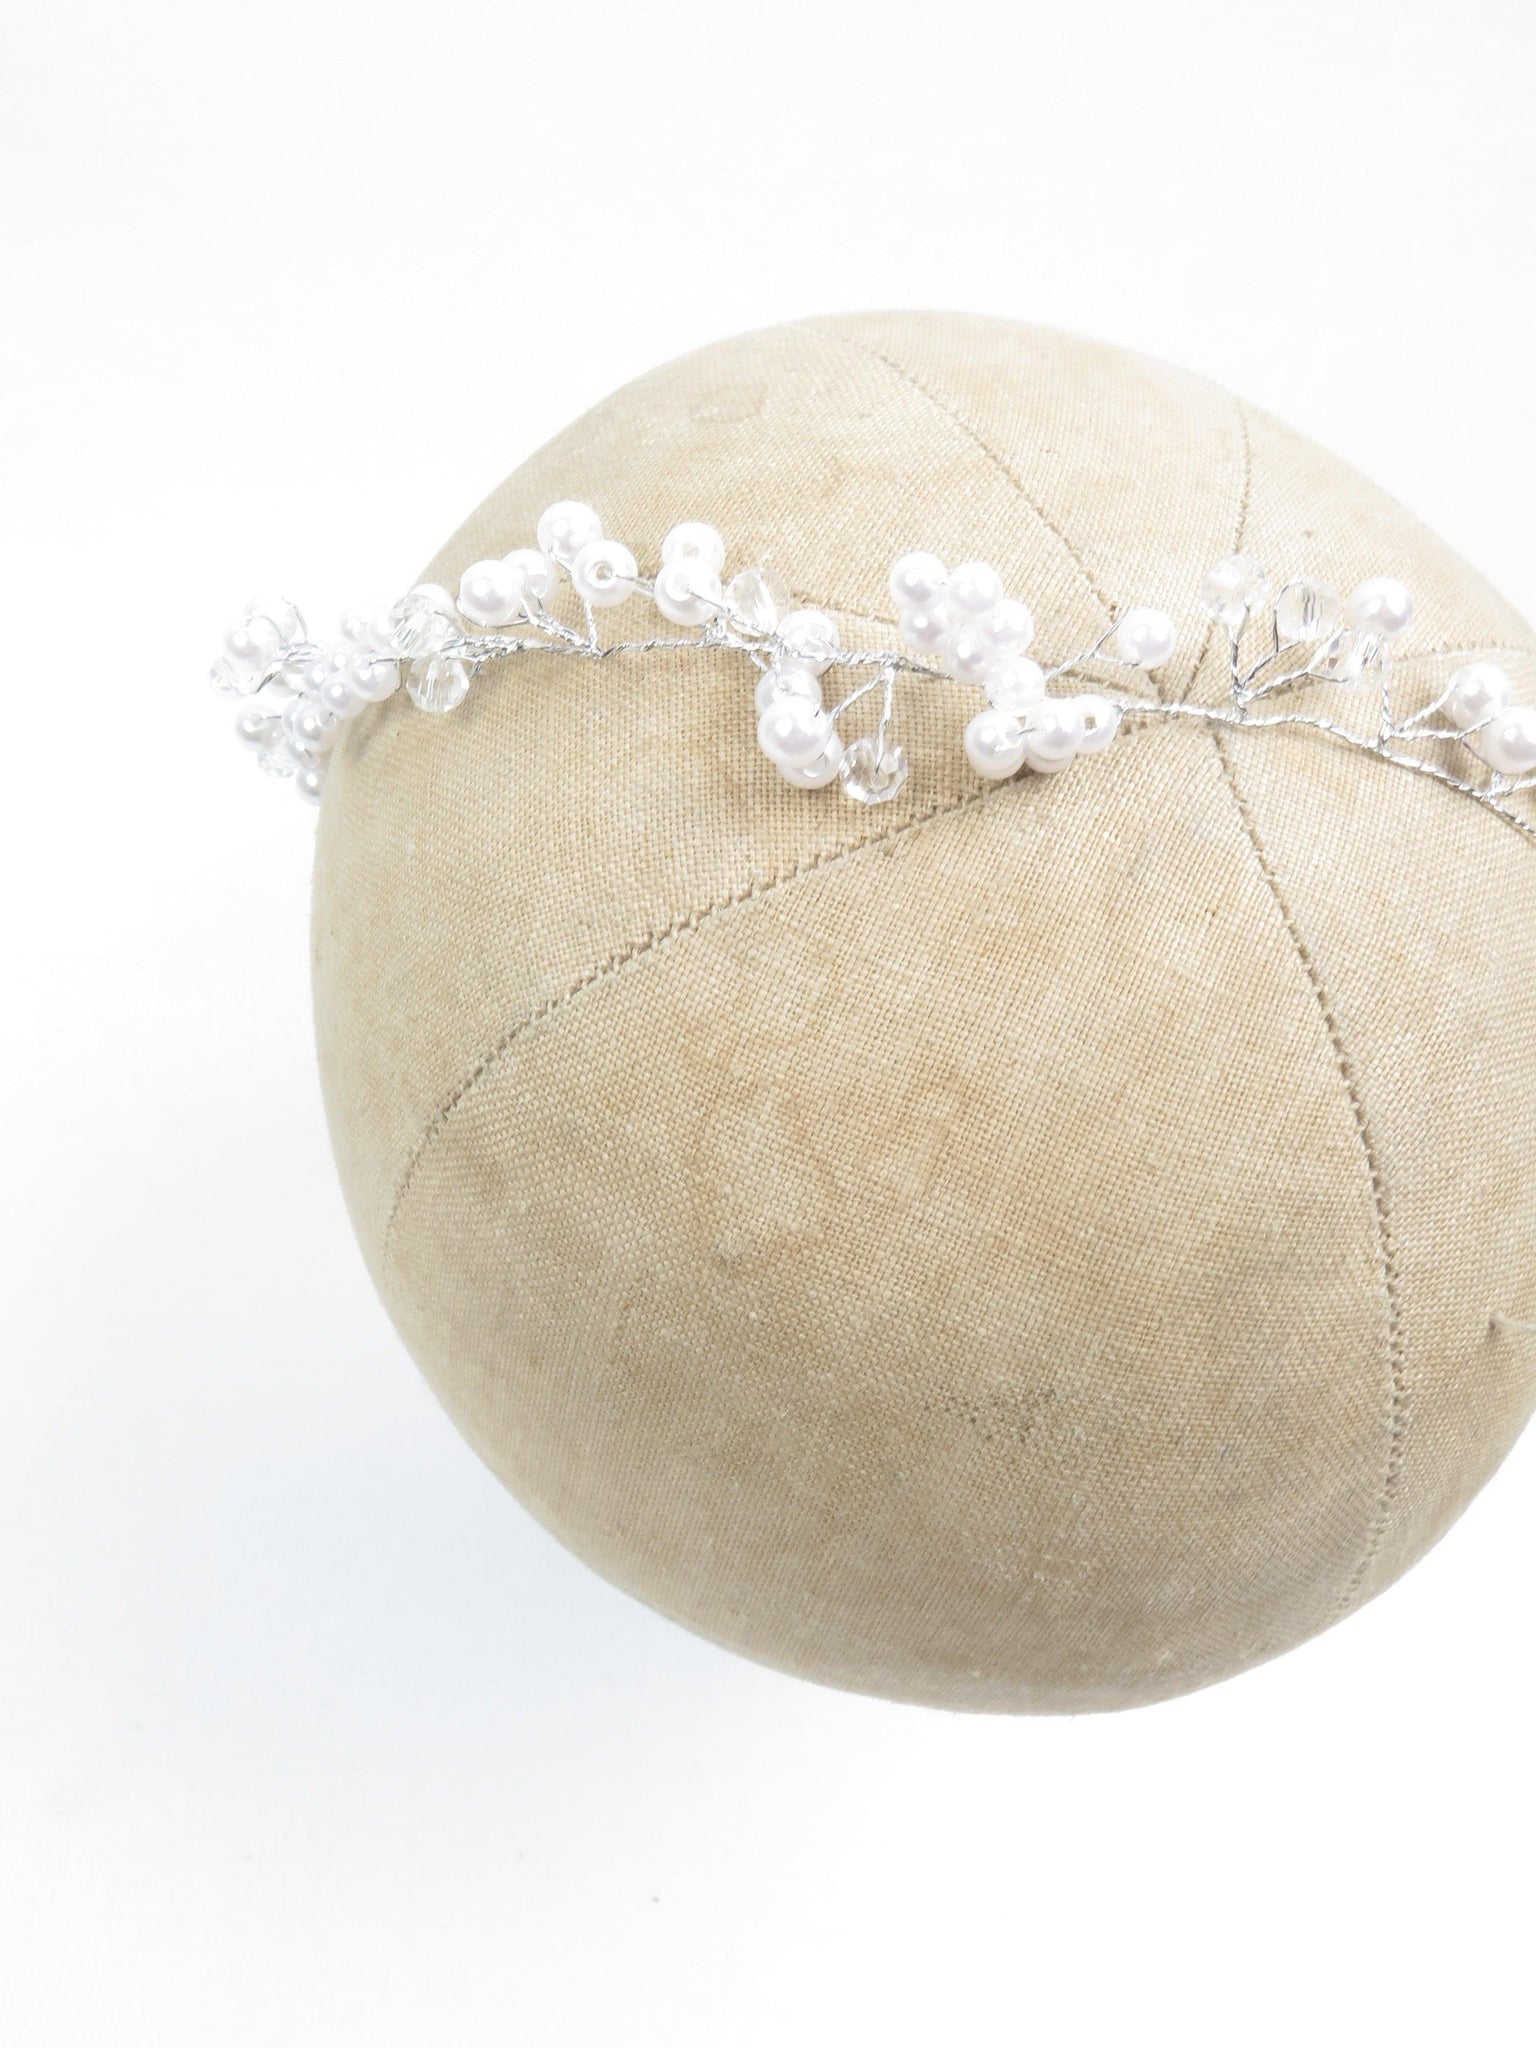 Hair Vine With Pearl Beads Bridal - The Harlequin